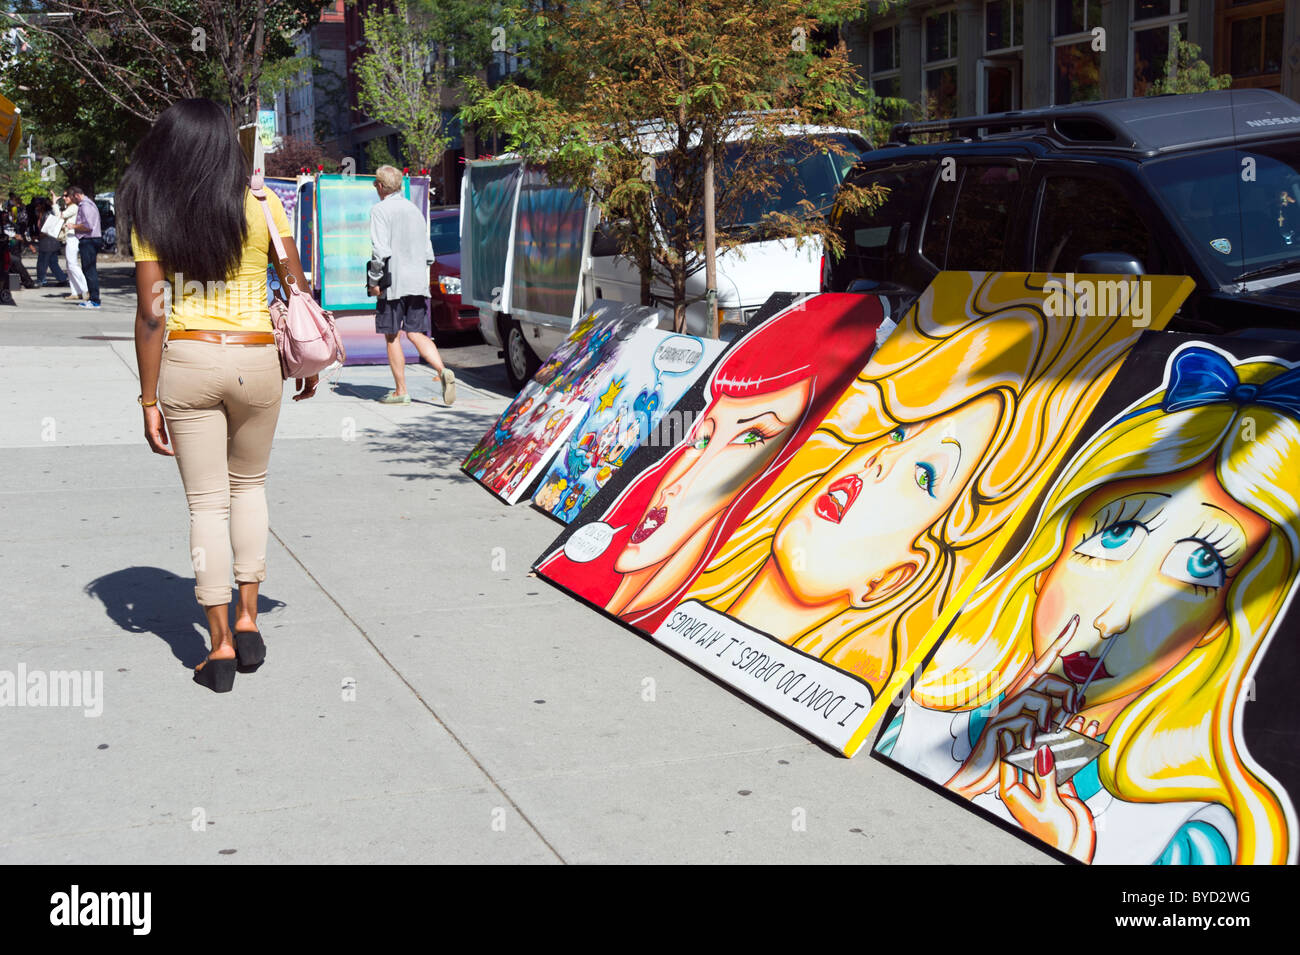 Pop art for sale on West Broadway in SoHo, New York City, USA Stock Photo